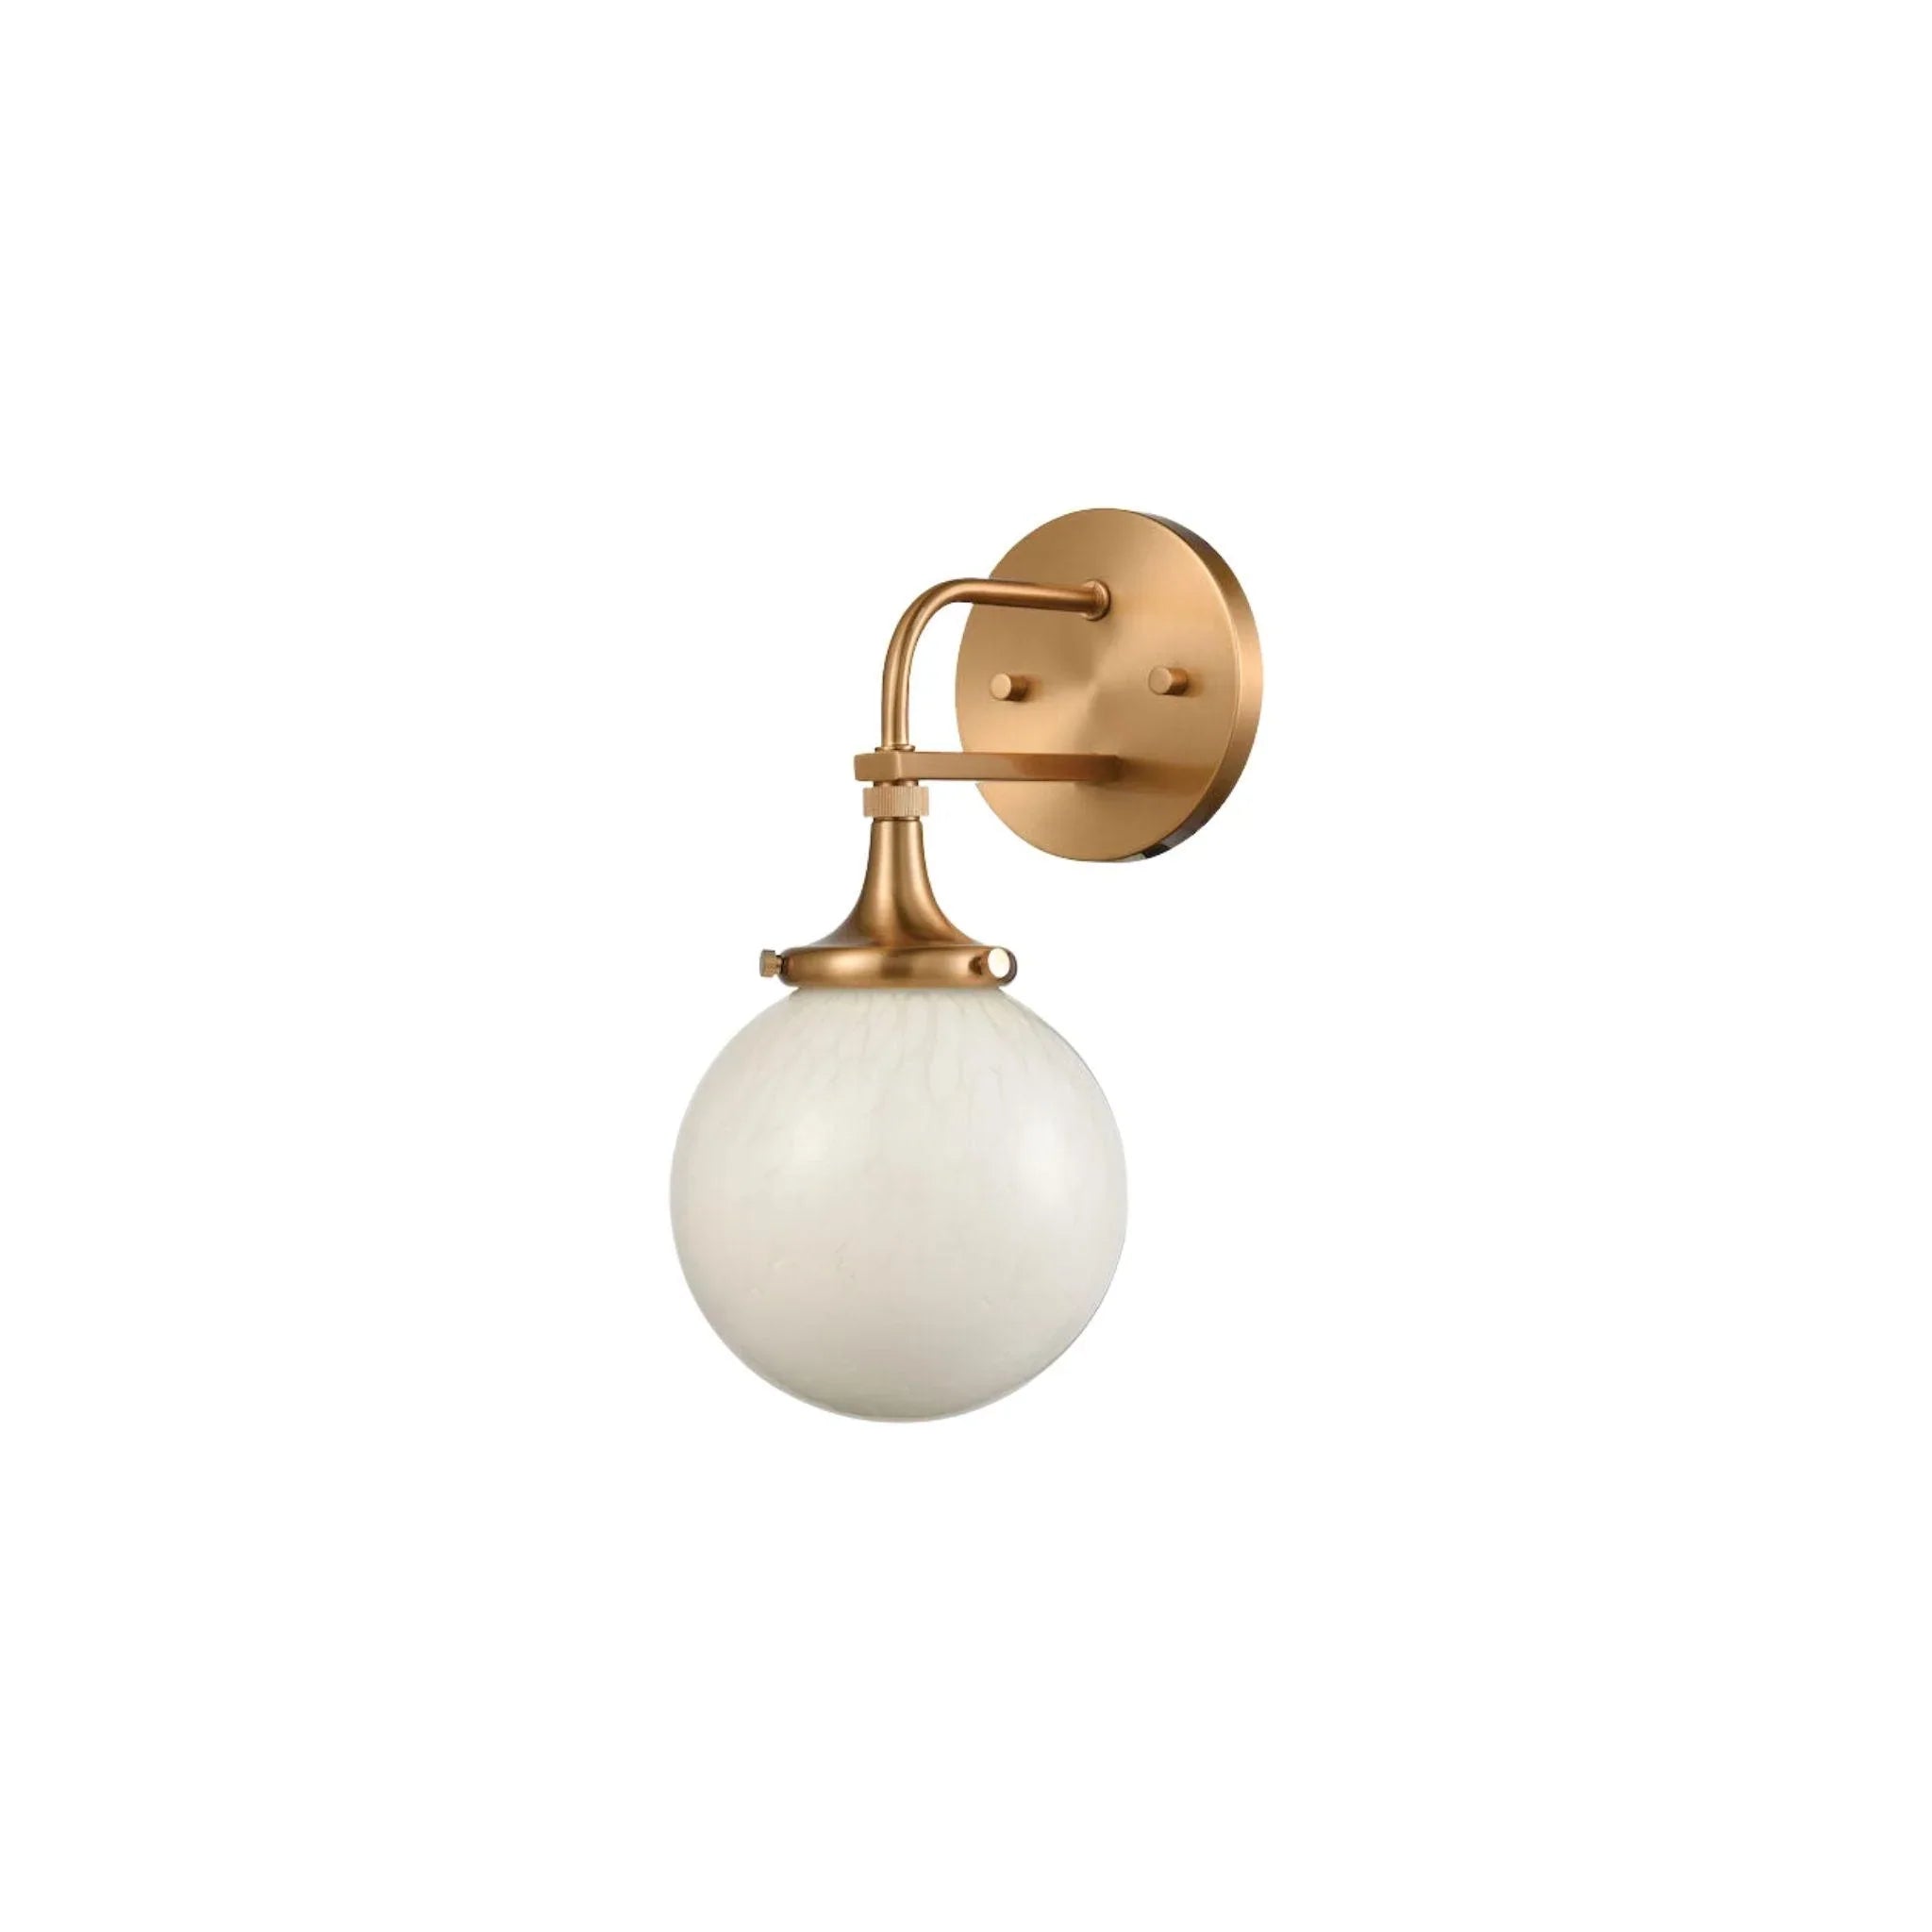 Traditional Antique Brass Wall Sconce With Off White Shade